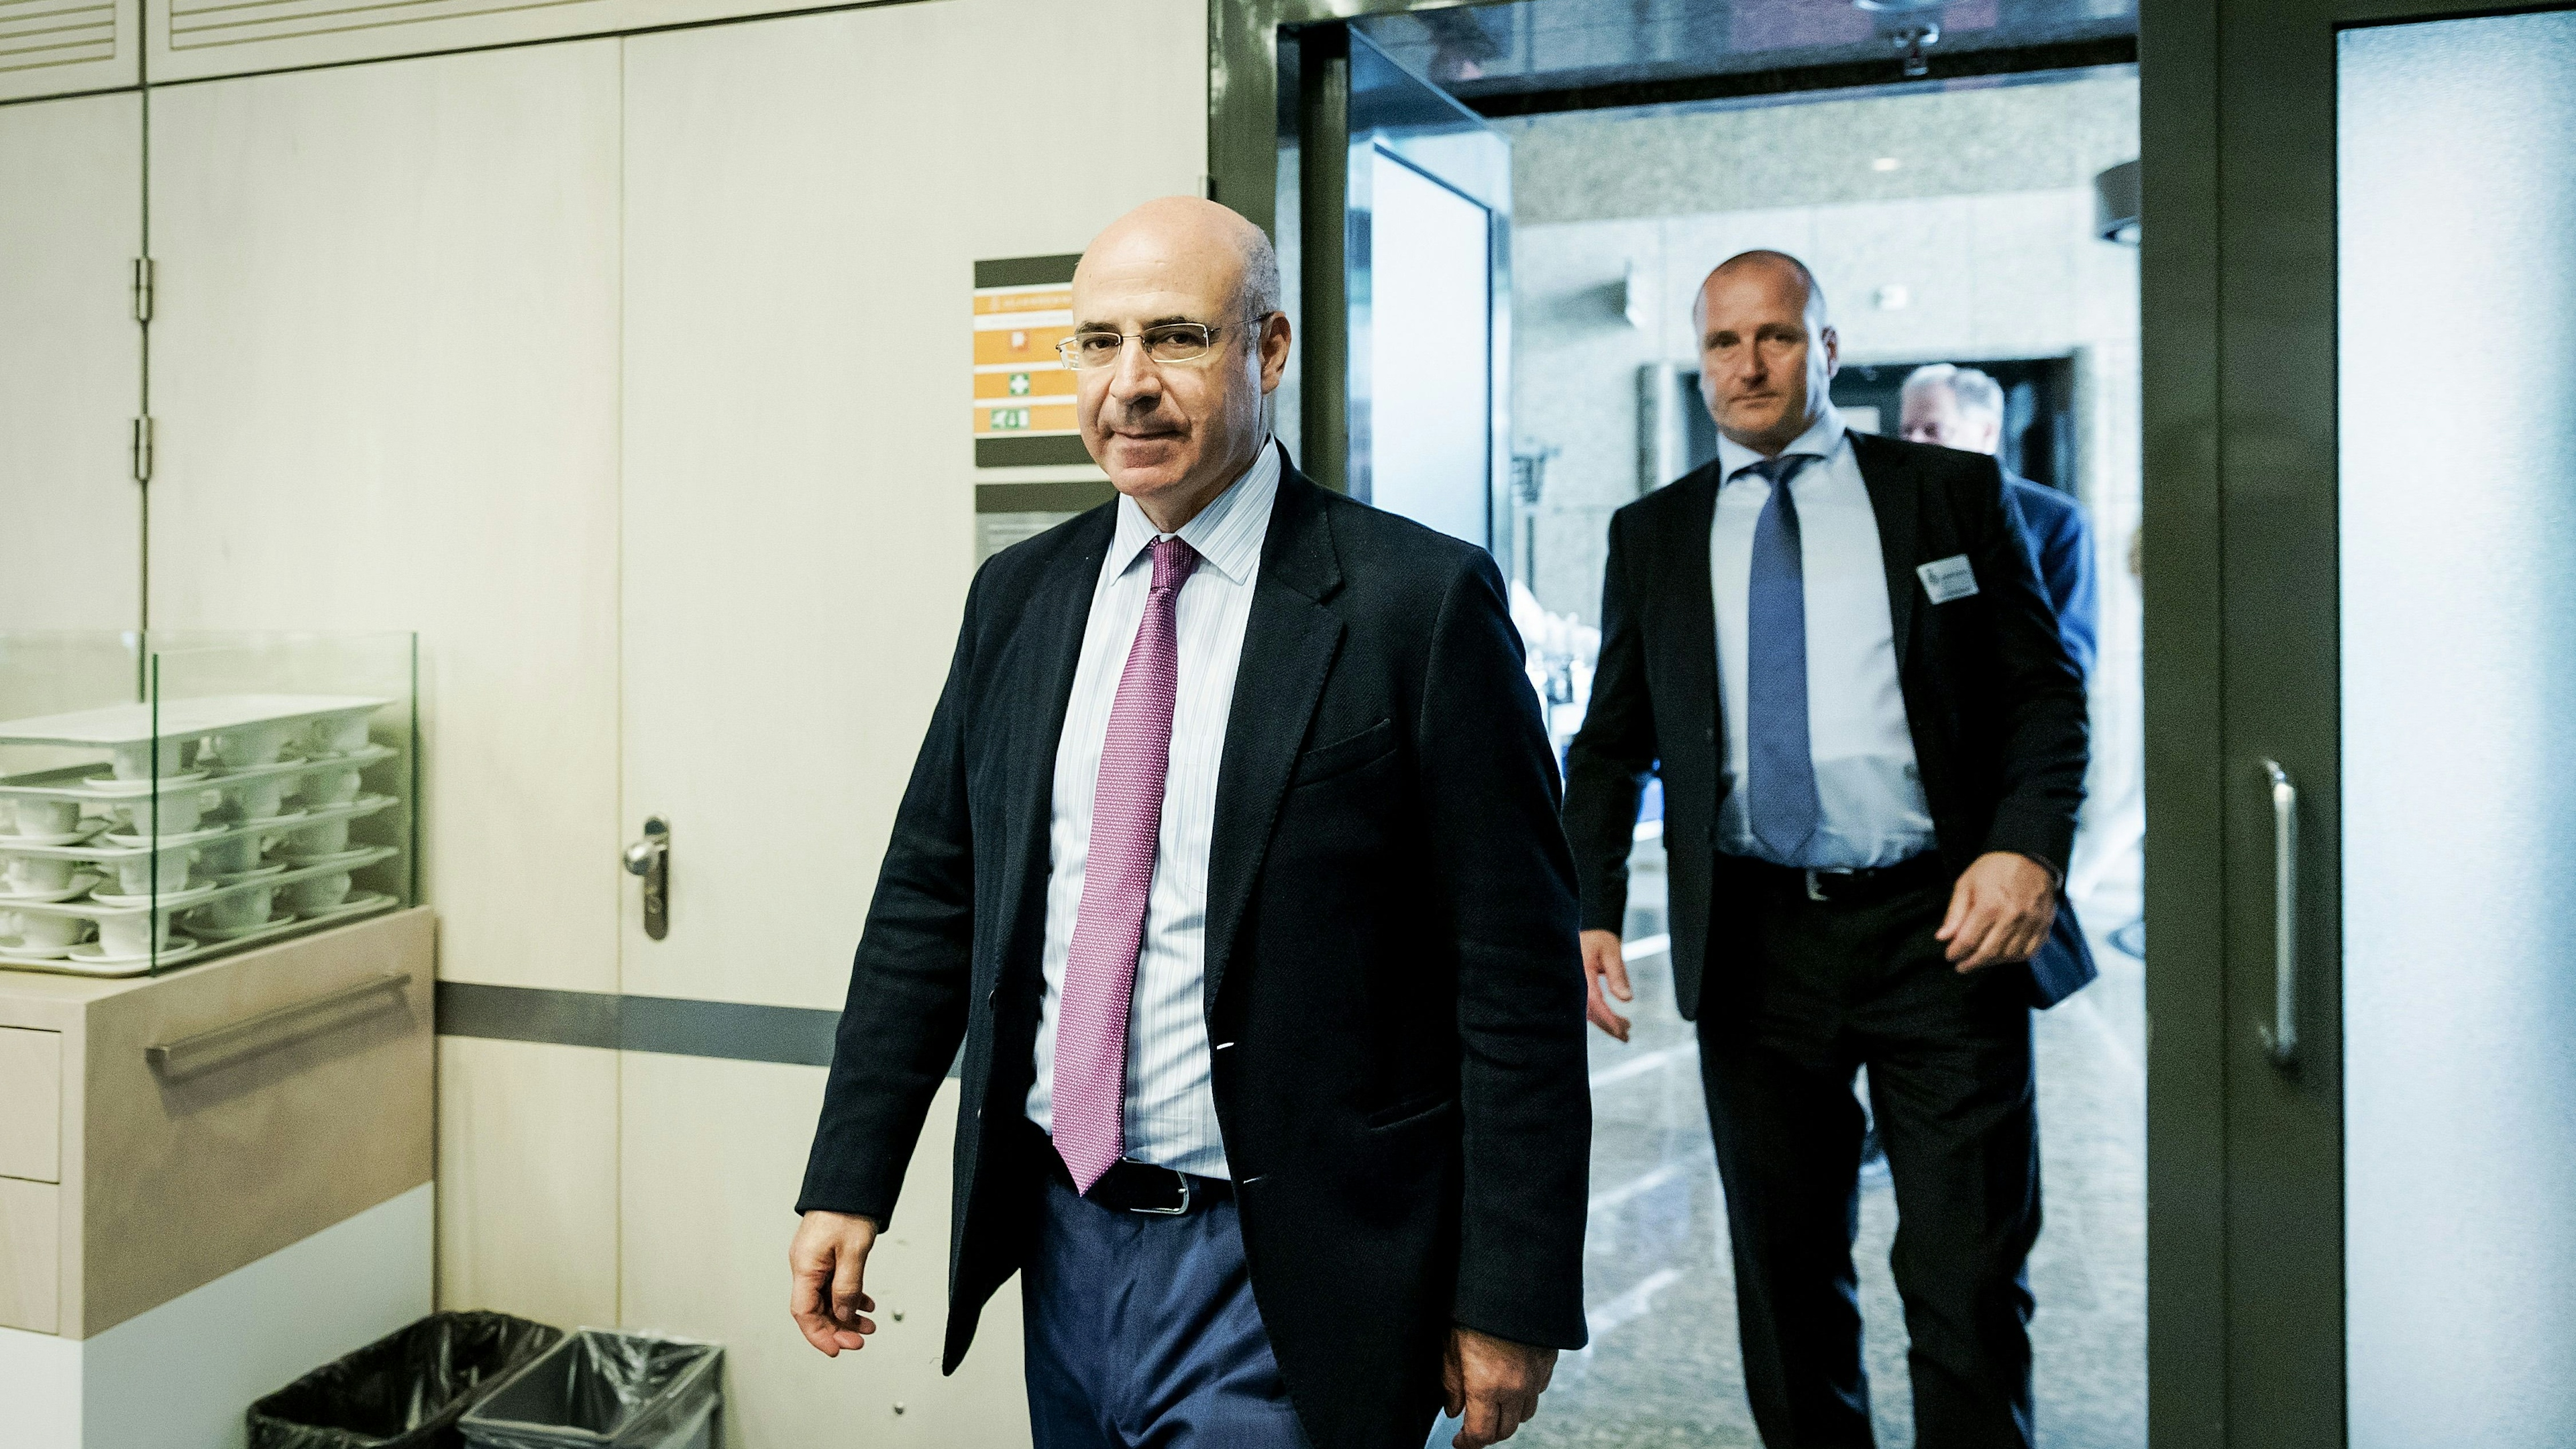 CEO of Hermitage Capital Management Bill Browder, a former Moscow financier turned anti-Kremlin activist, walks in the House of Representatives in The Hague on May 23, 2018, where is to speak on the Magnitsky Act.